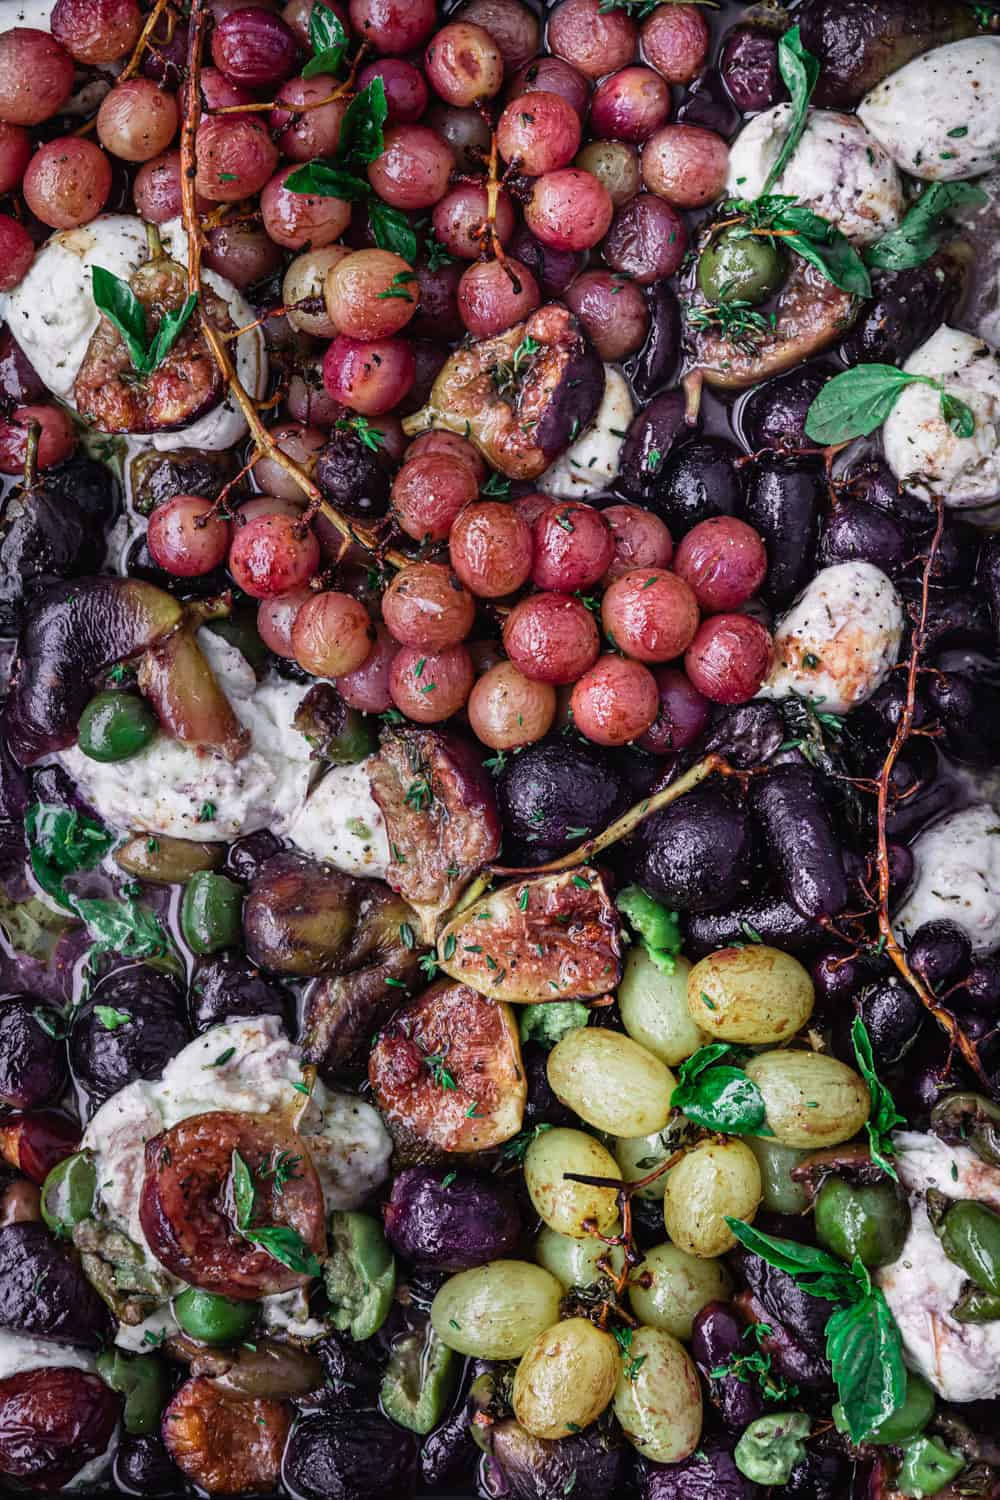 Balsamic & thyme roast grapes topped with burrata read to be eating; still on a baking sheet and overhead shot